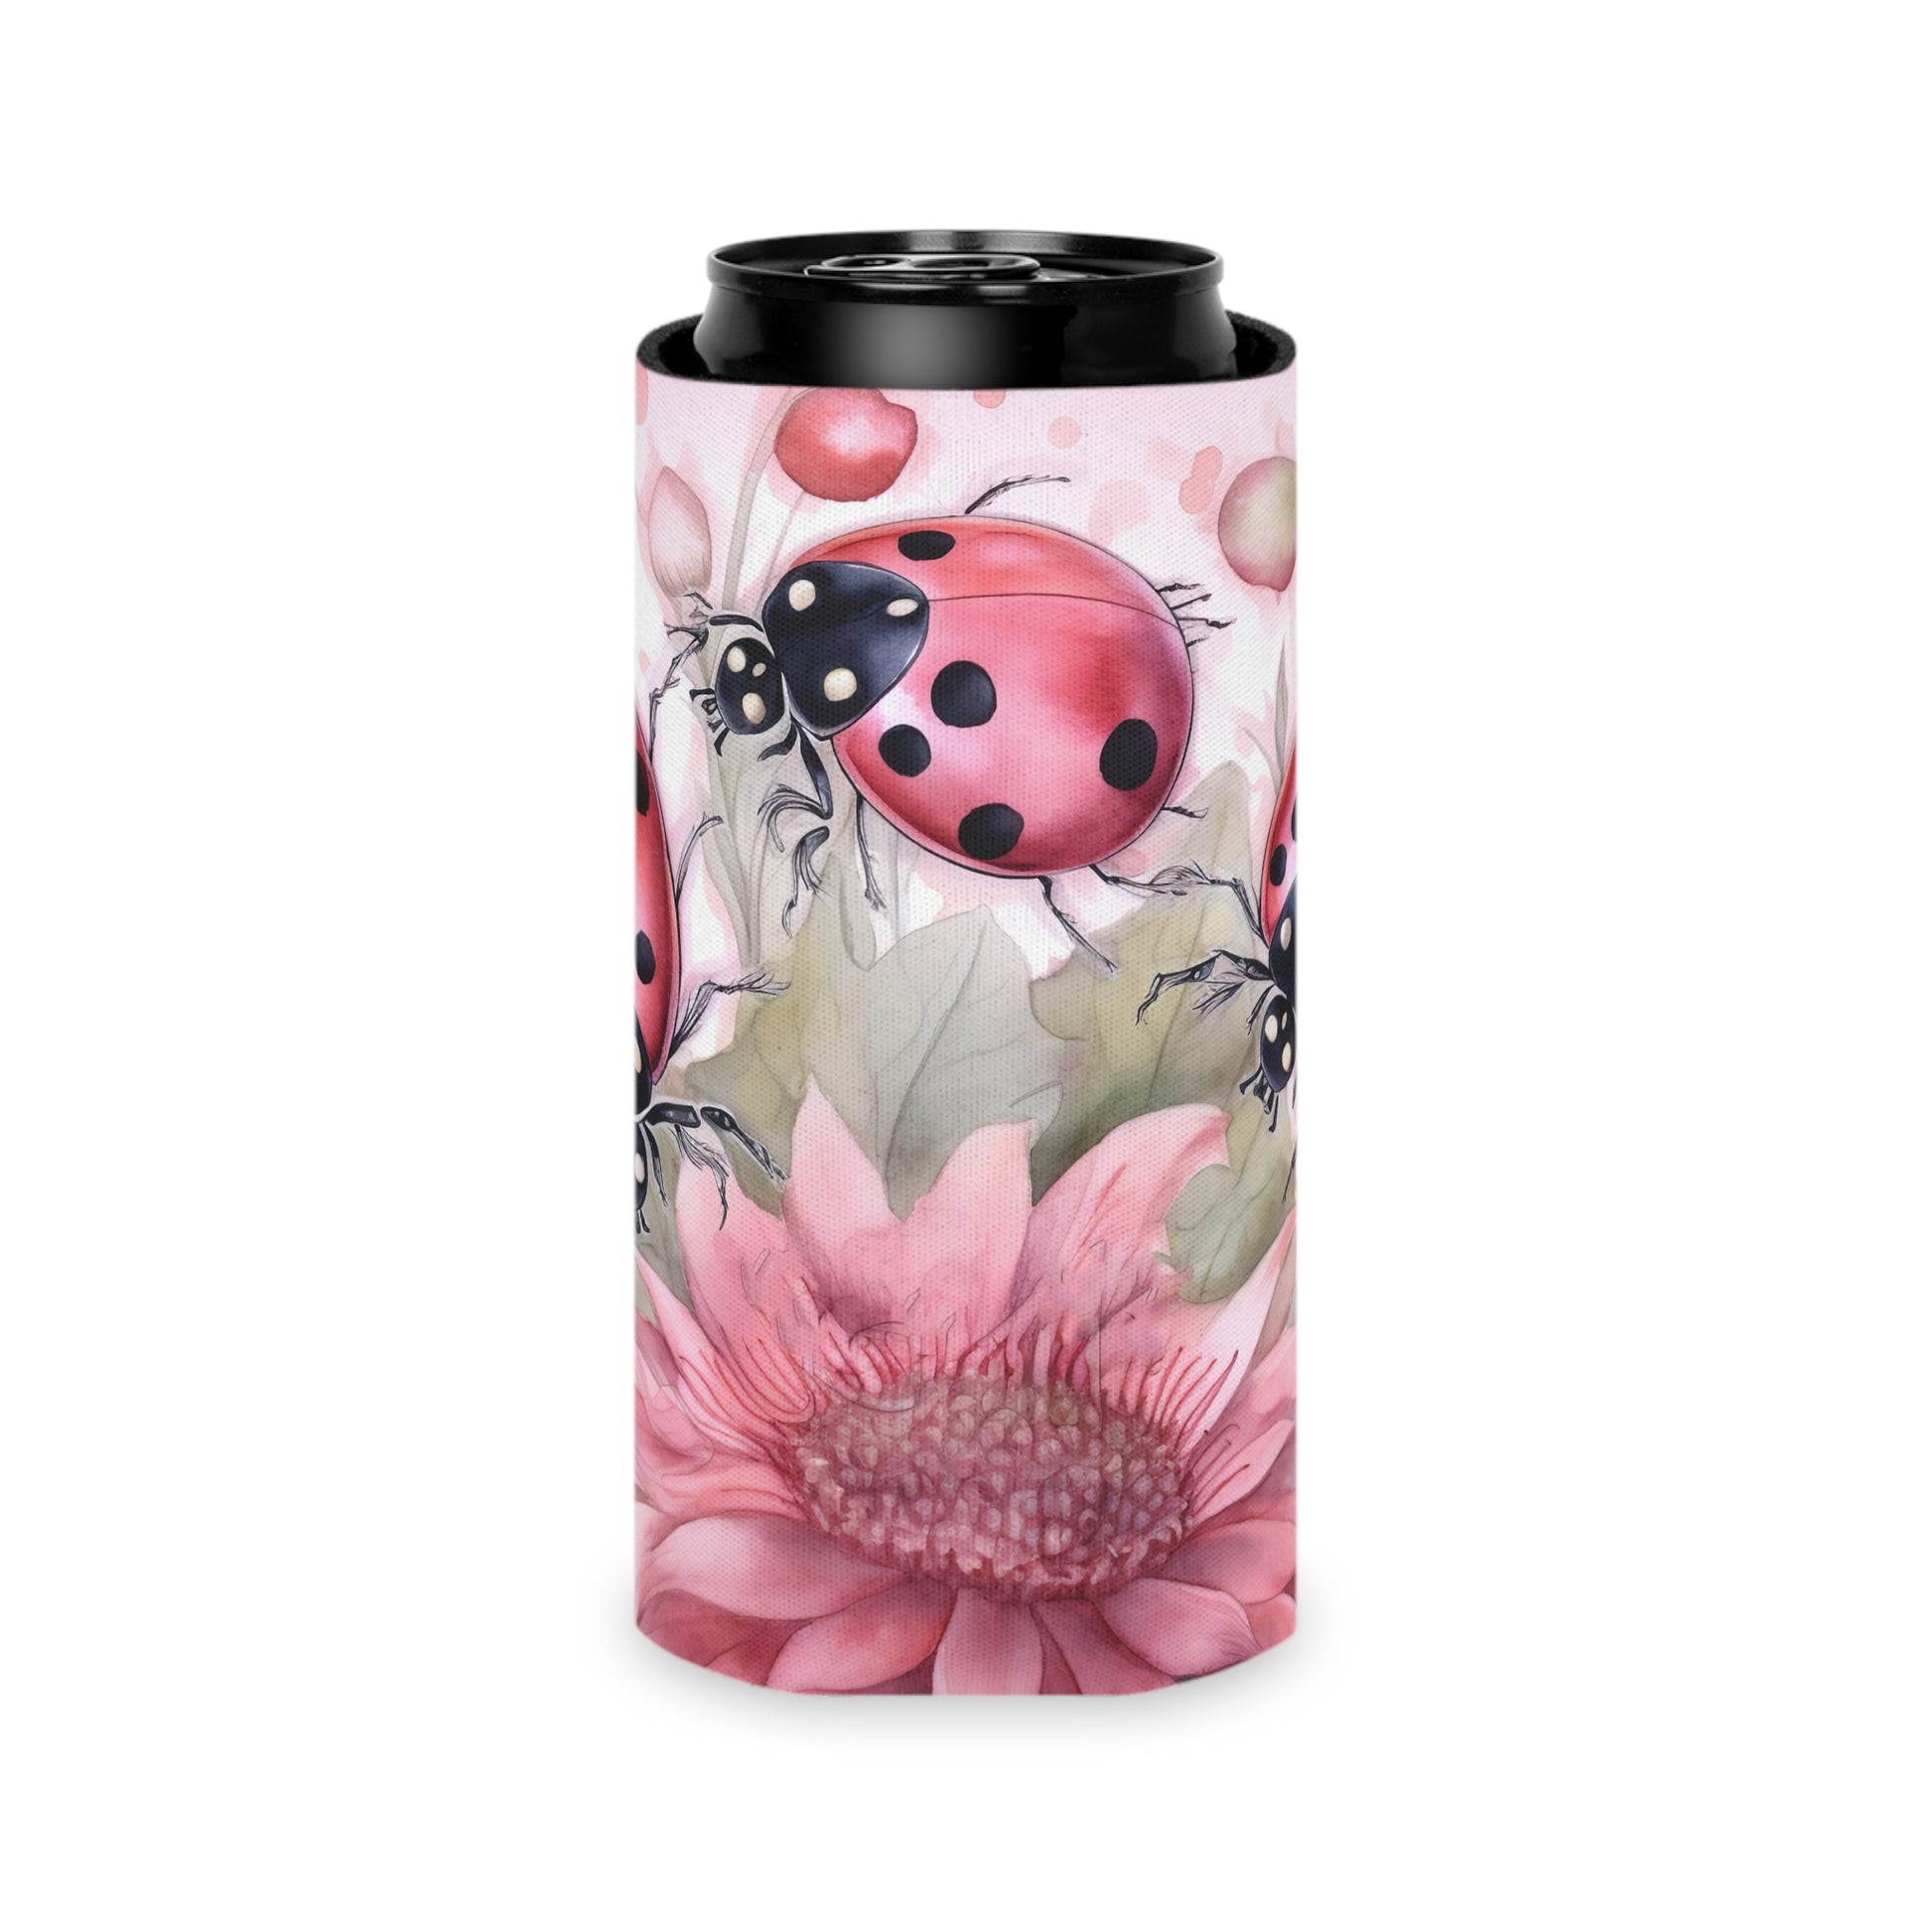 summer watercolor pink ladybug and floral can cooler or koozie